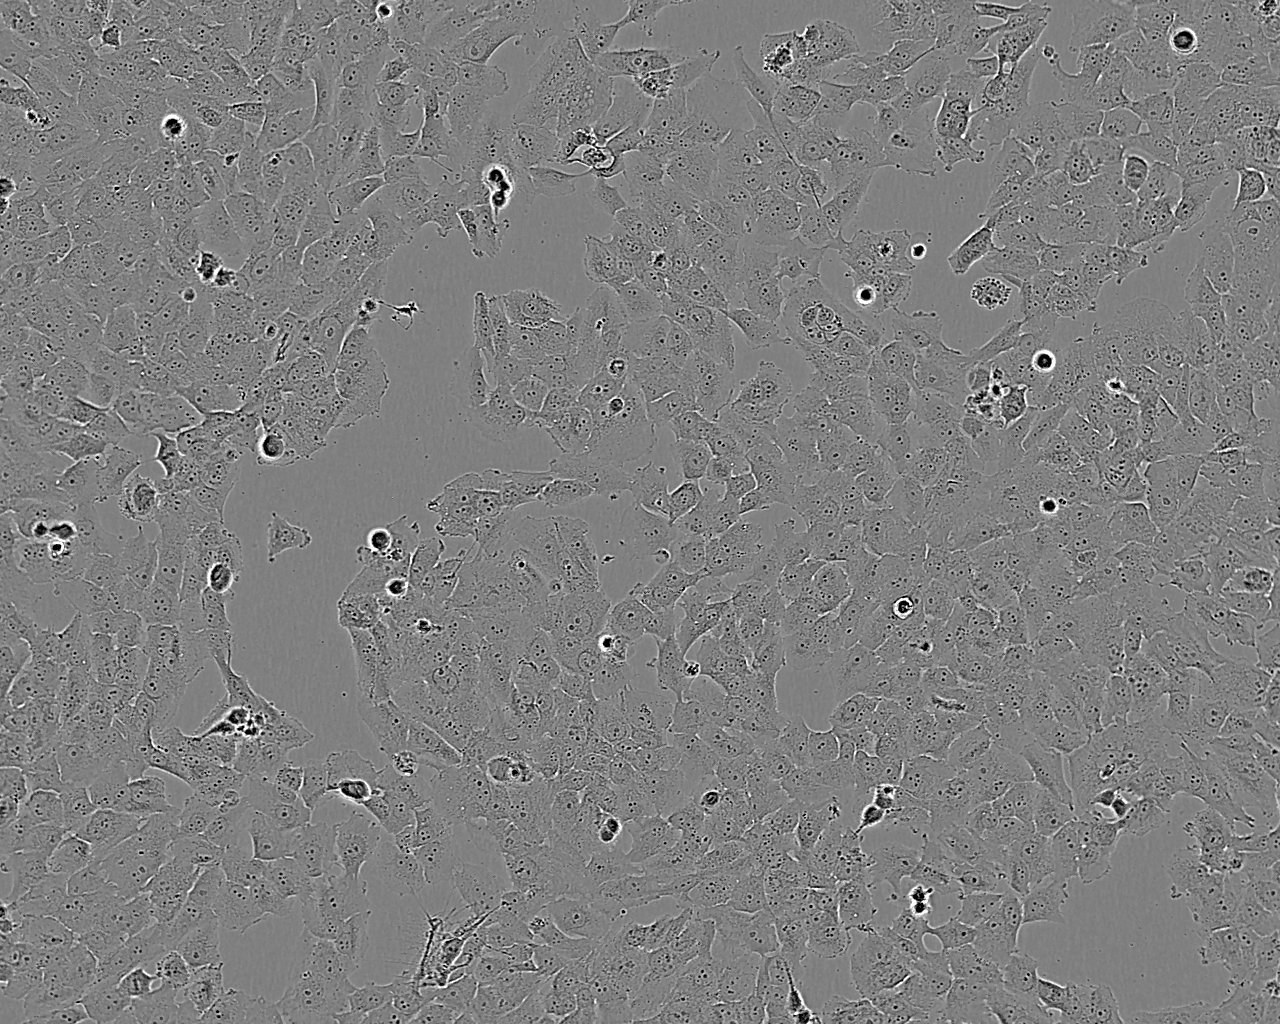 AM-38 epithelioid cells人脑胶质母细胞瘤细胞系,AM-38 epithelioid cells